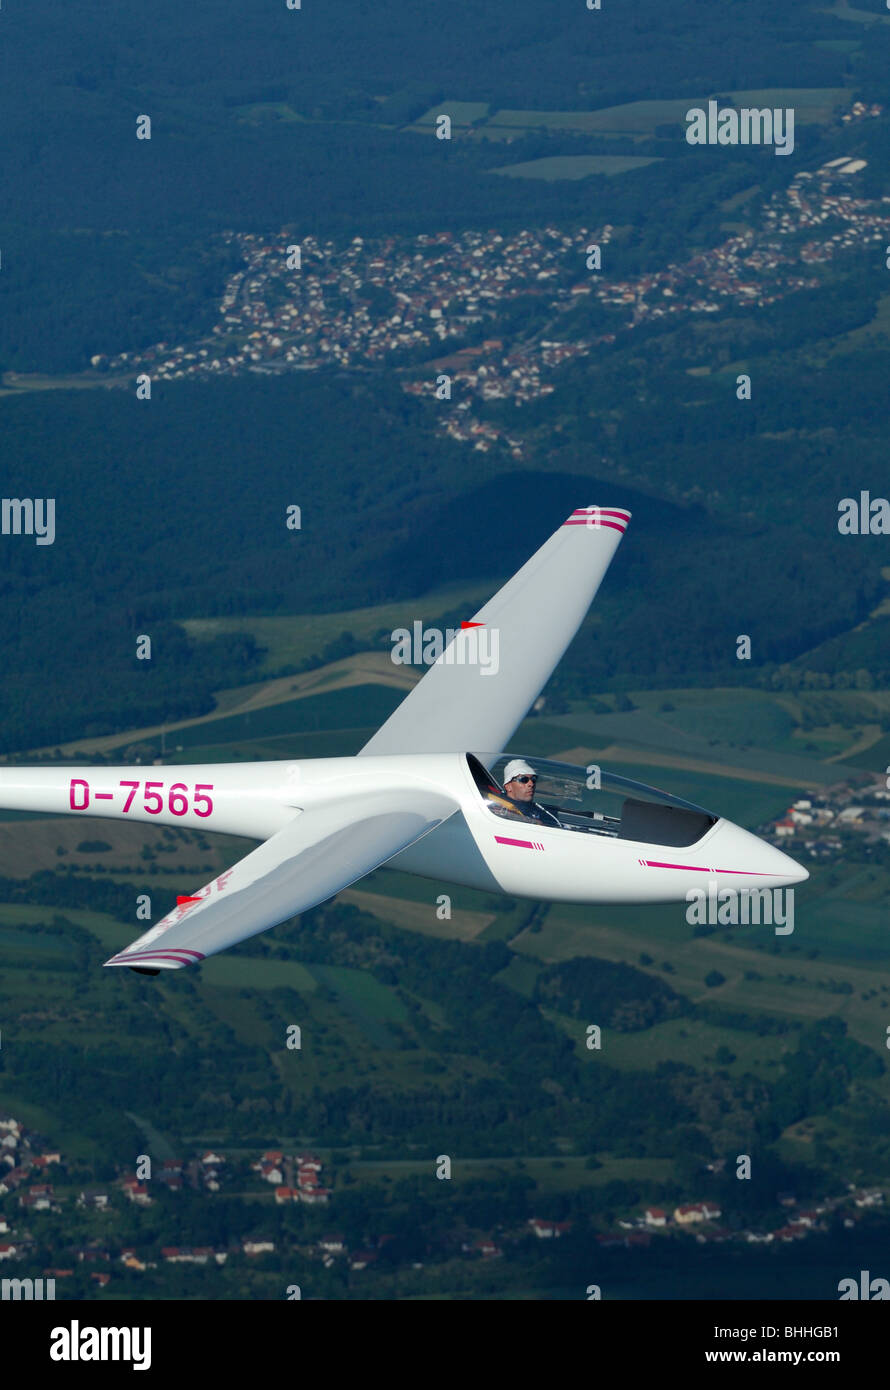 Single seat glider Asw 19b in flight over Saarland countryside - Germany Stock Photo